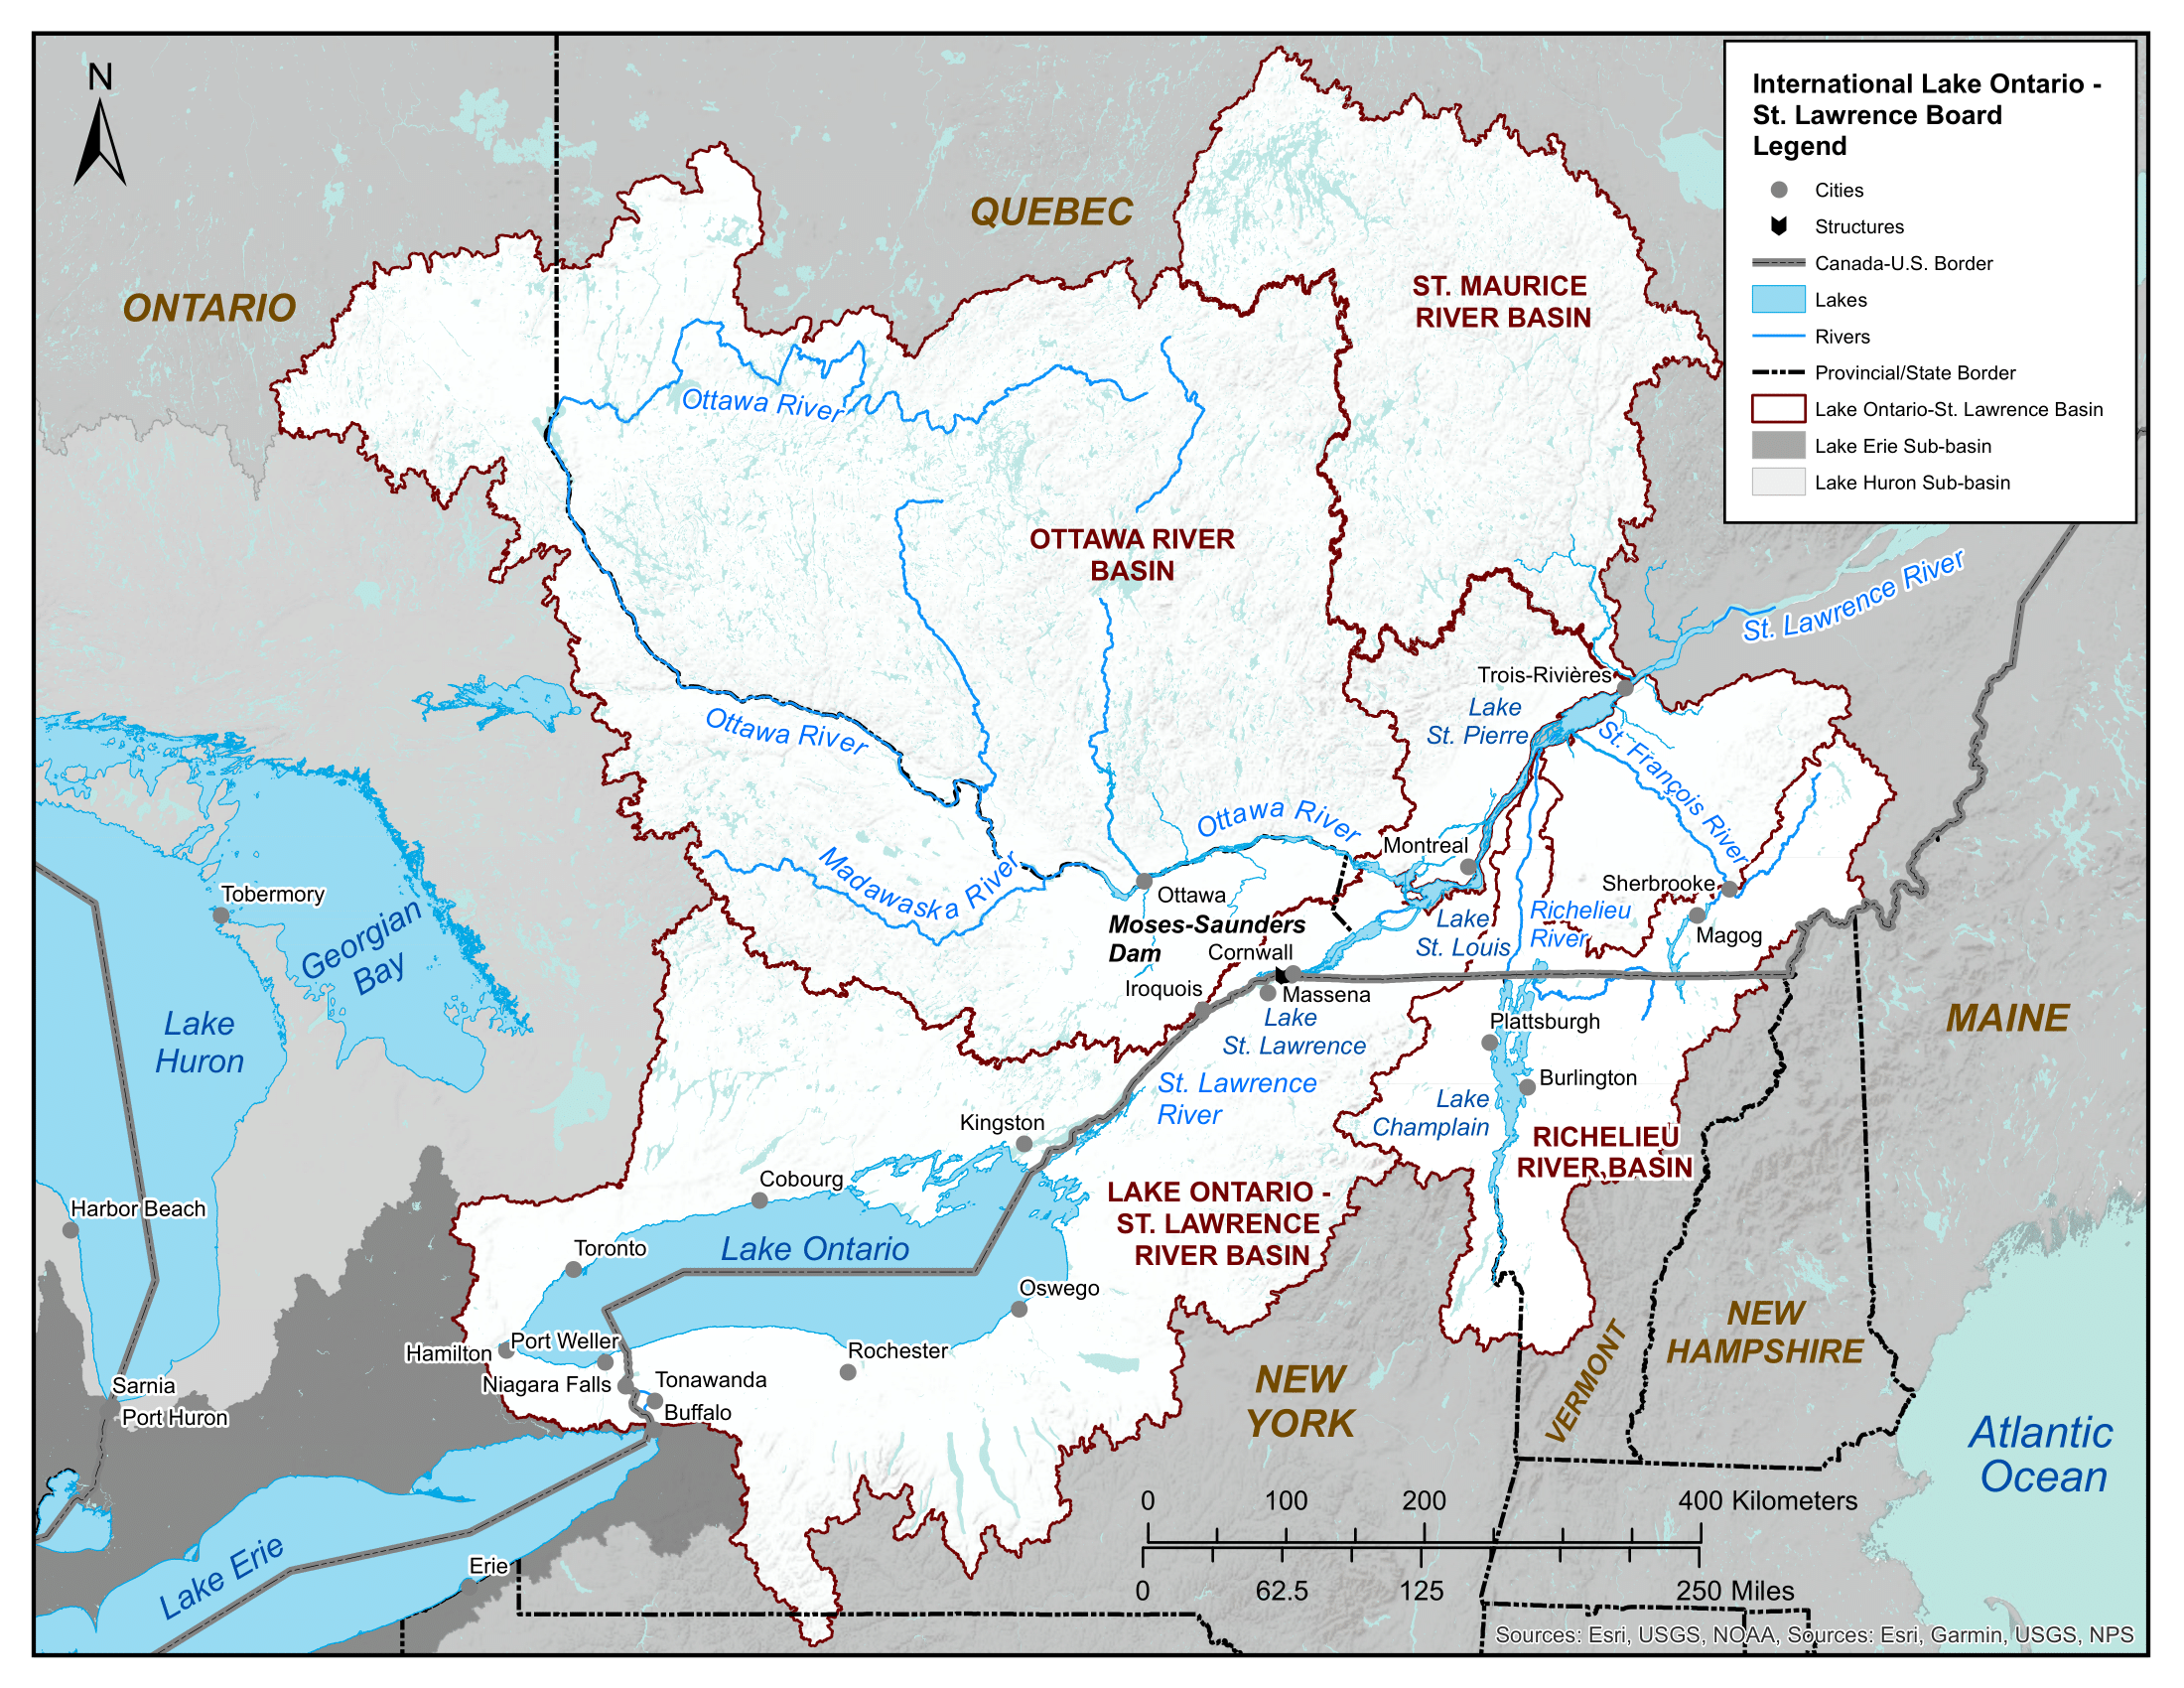 Map of Lake Ontario and St. Lawrence River